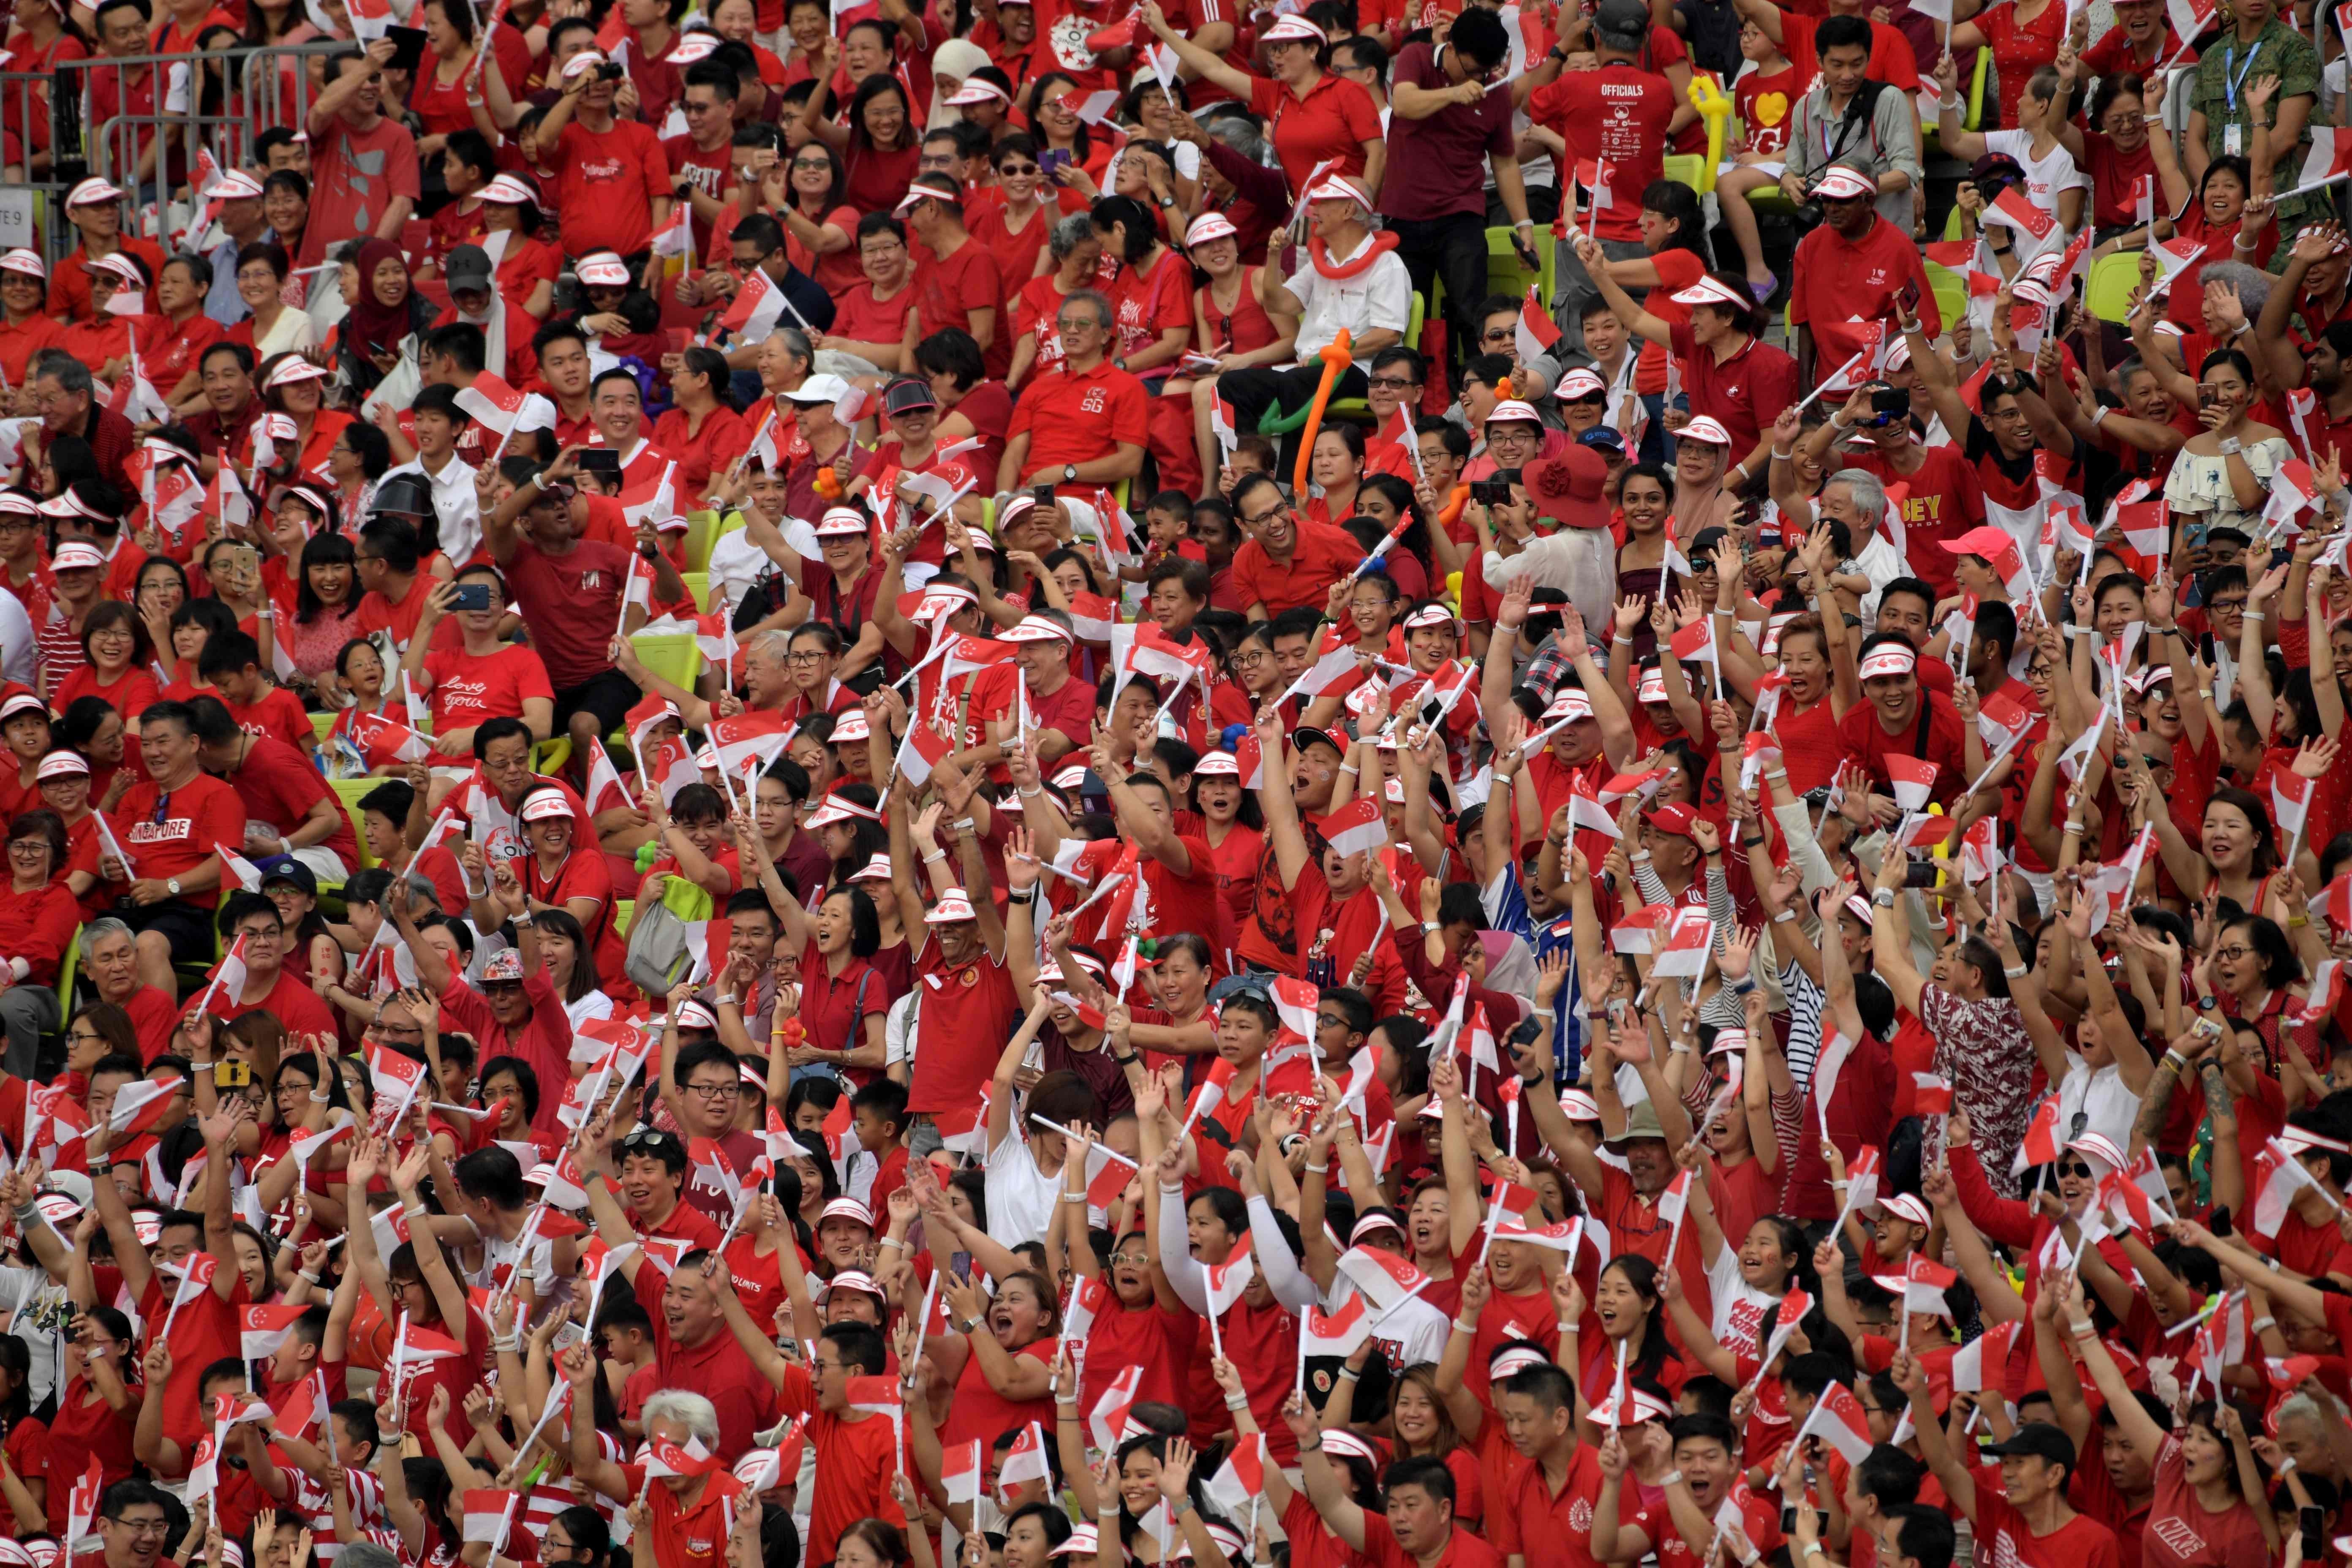 Spectators wave the Singapore national flag as they wait for the start of the 54th national day parade on Friday. Photo: AFP